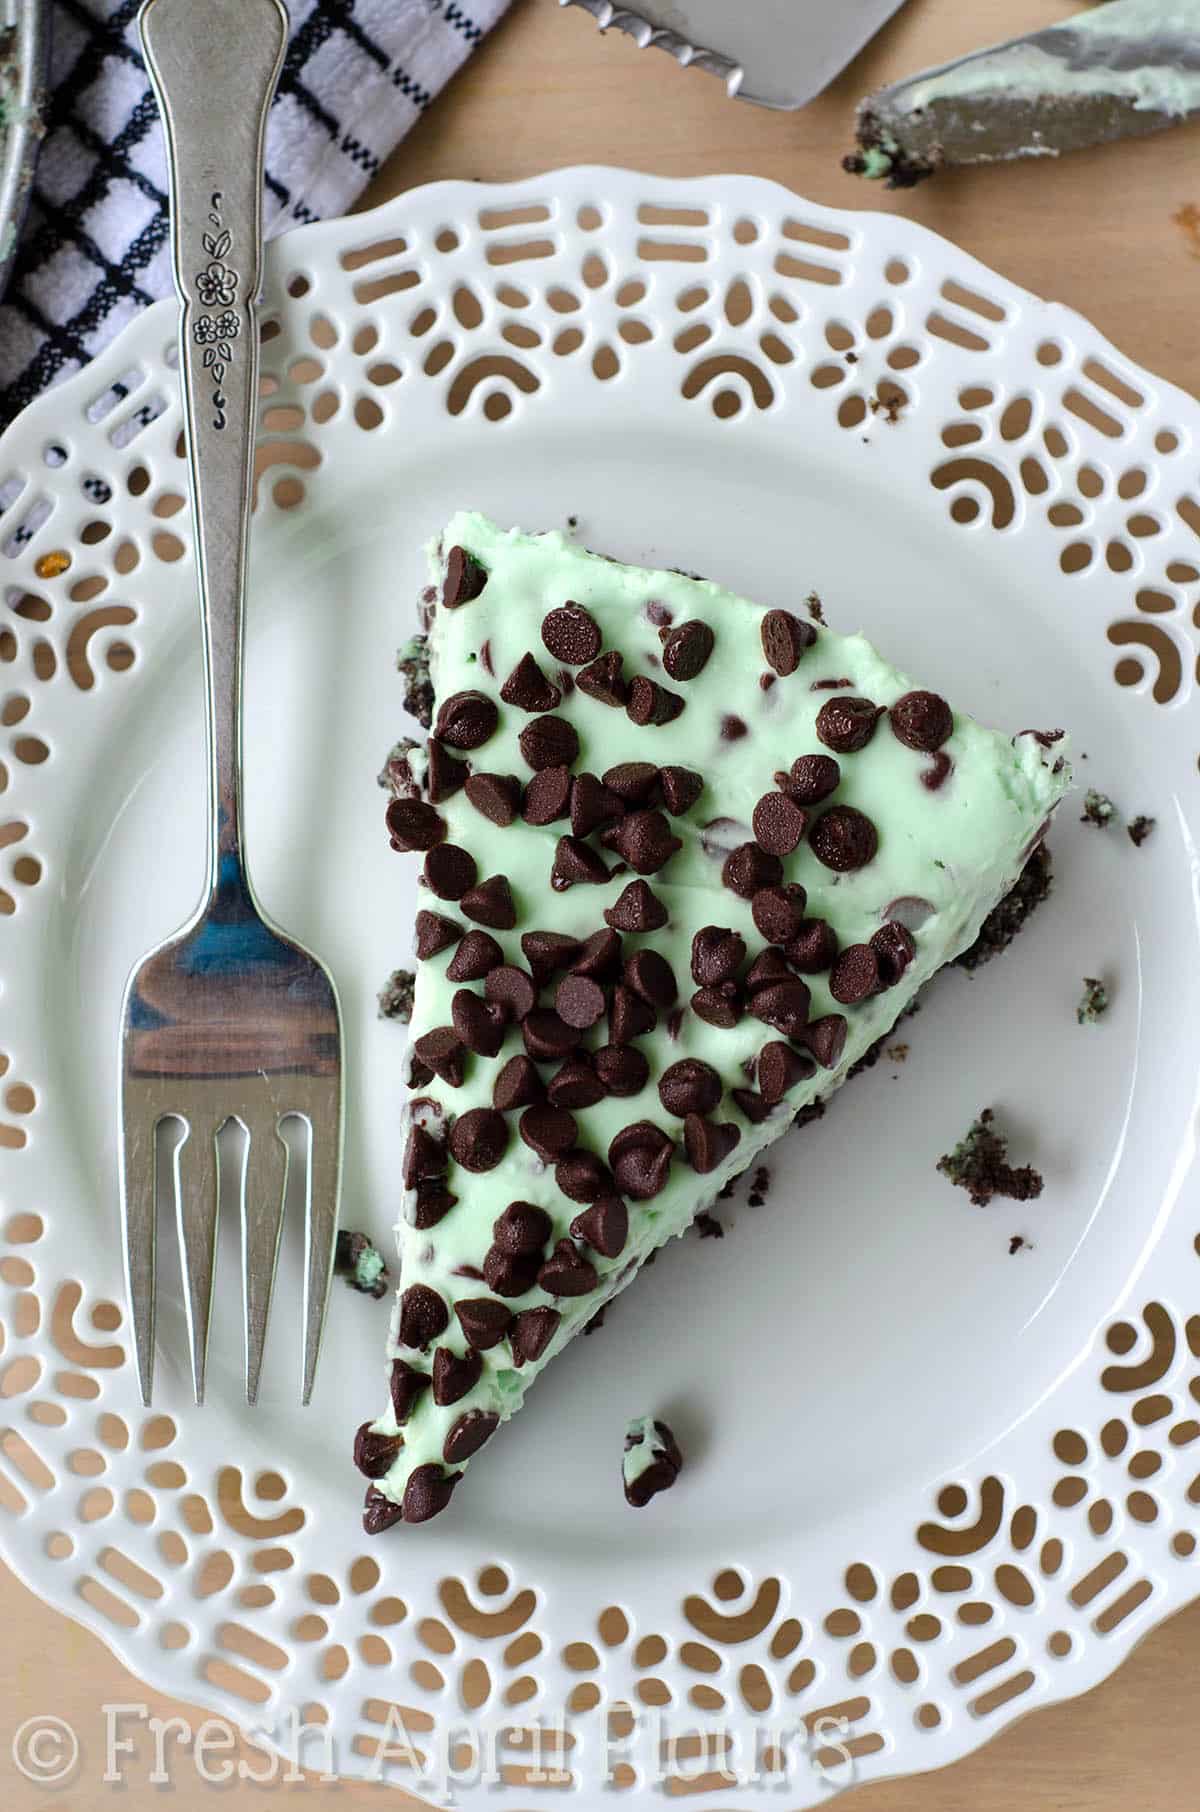 No Bake Mint Chocolate Chip Pie: Creamy, minty filling dotted with mini chocolate chips all on top of a crunchy mint Oreo cookie crust.